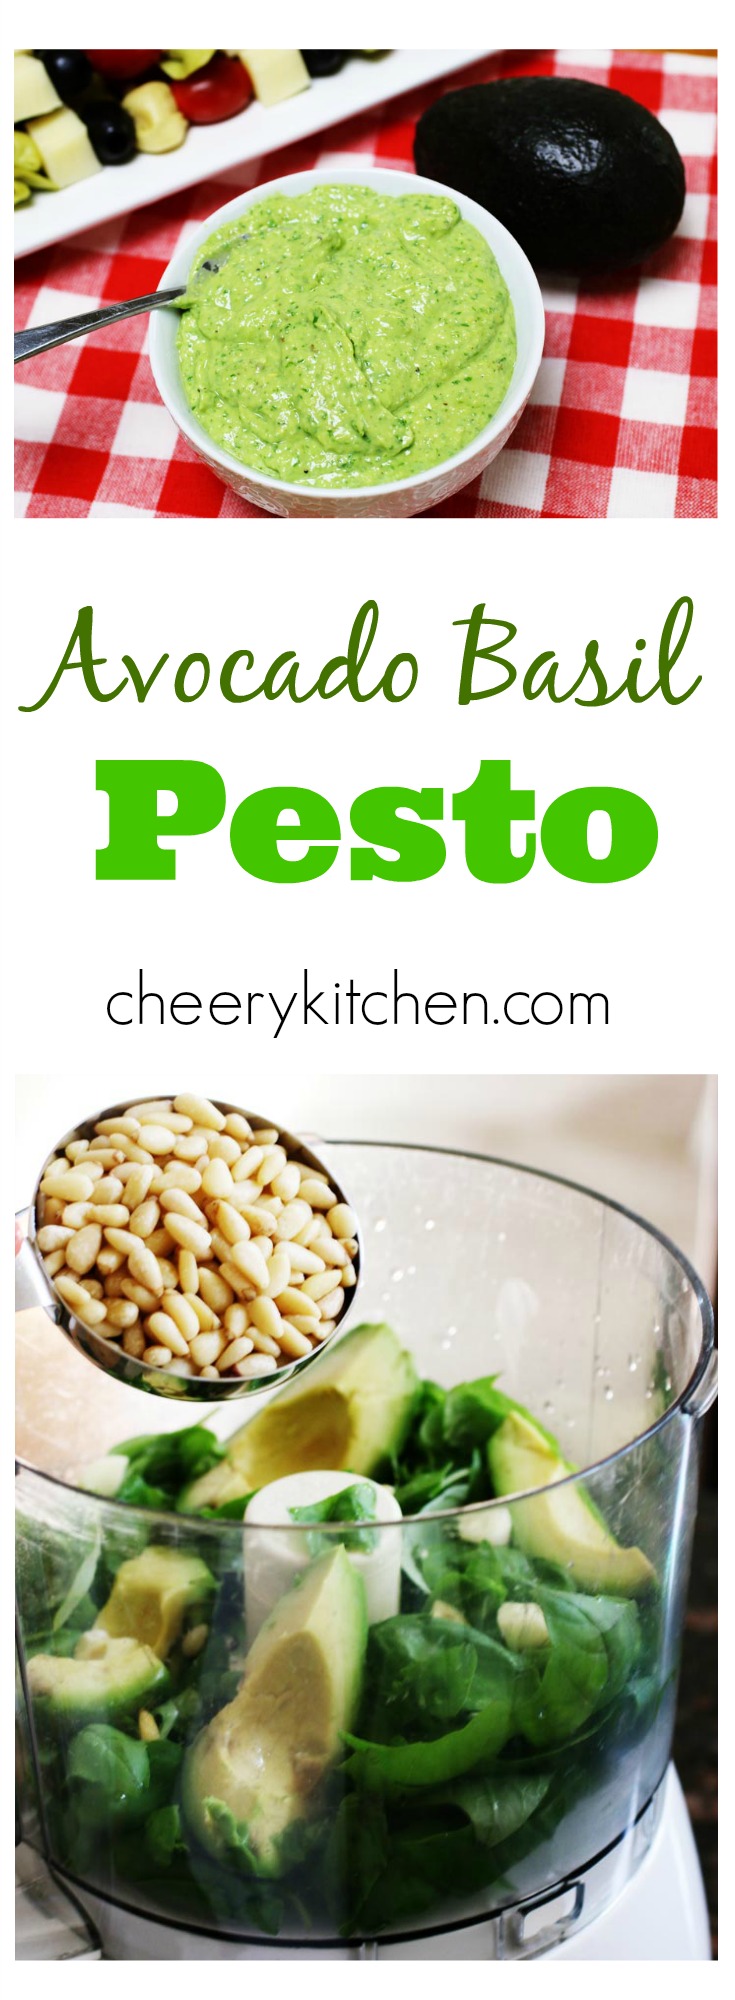 Creamy heart-healthy Avocado Basil Pesto is a sauce you can toss with pasta, dip into with your favorite veggies, spread on sandwiches, or dress your salads. It's perfectly delicious for about $5 in 5 minutes!